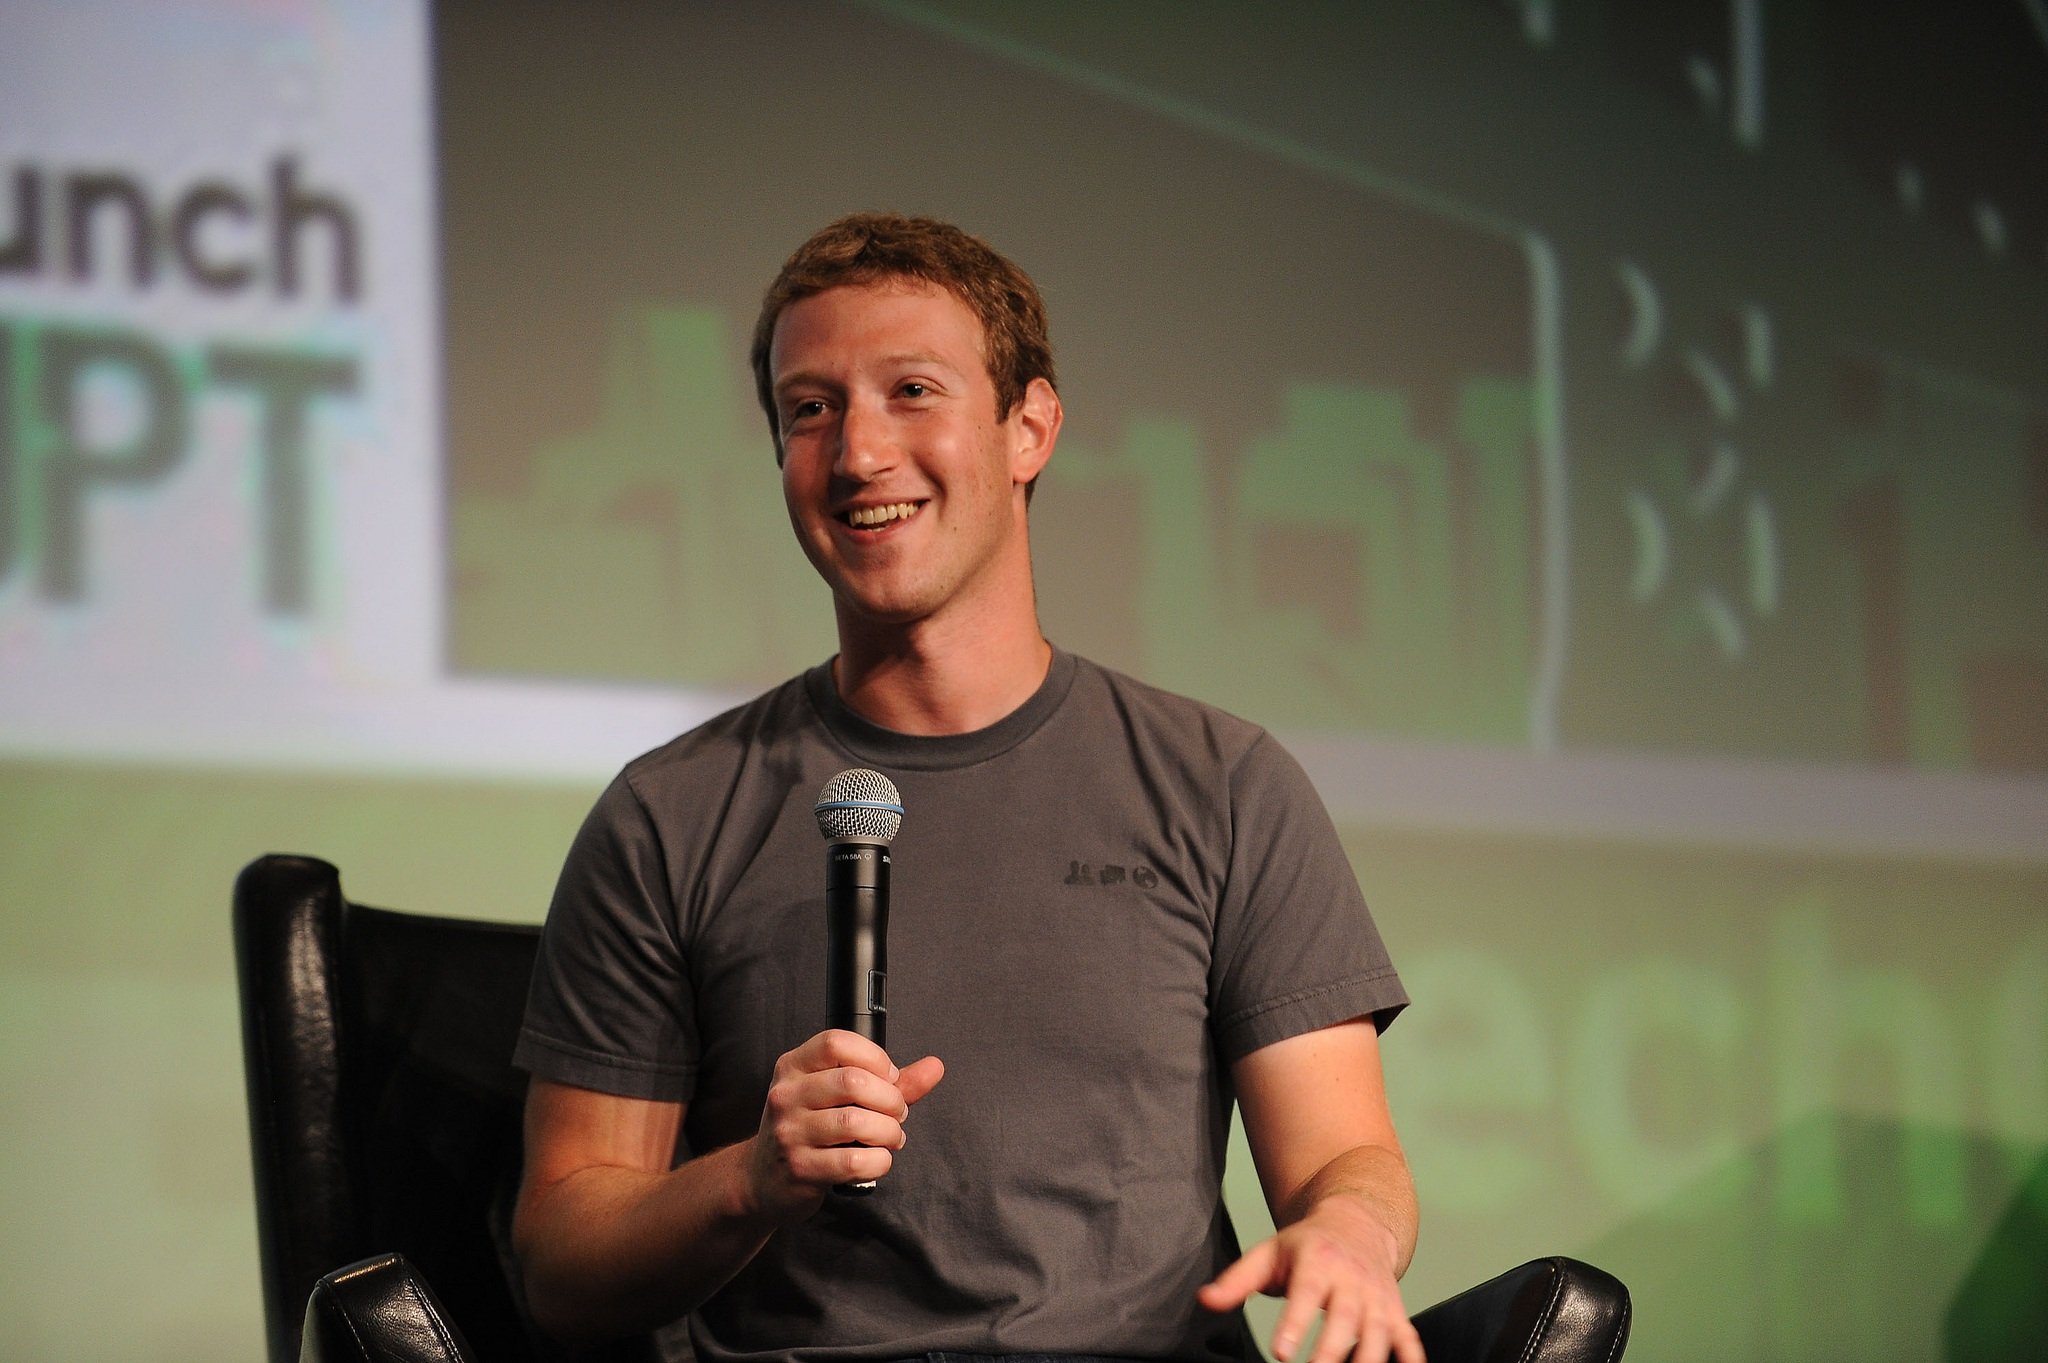 Wanna Make One Billion Dollars? Tech Companies Are What You Should Go For